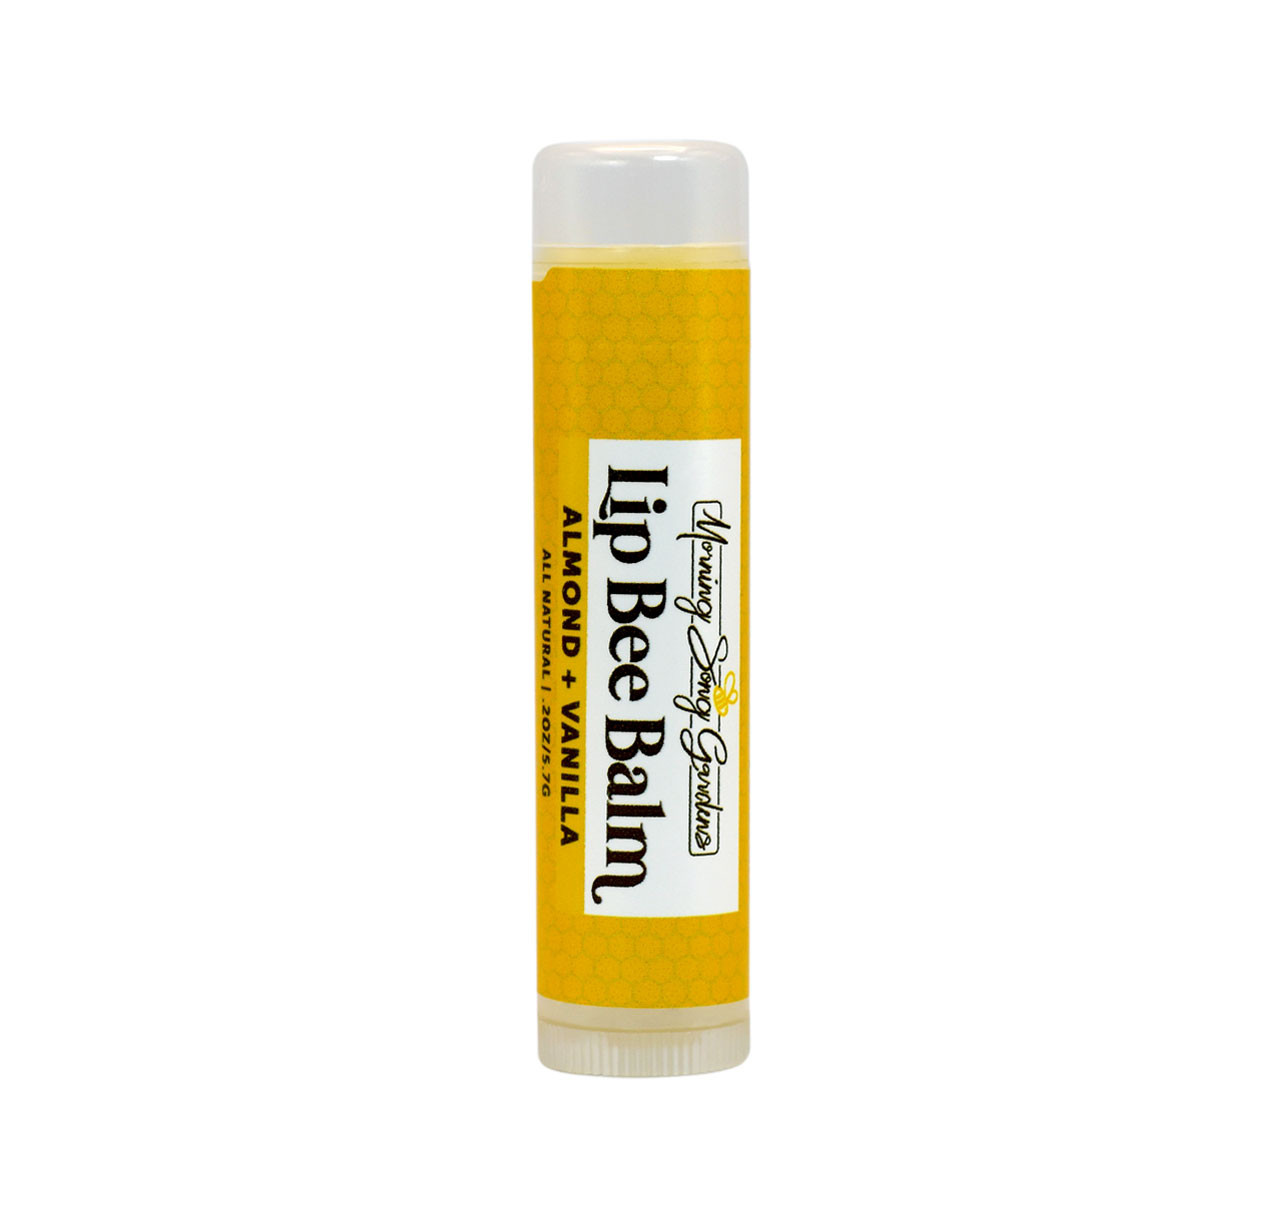  Beeswax Organic Pure Yellow Pelts - Beewax For Lip